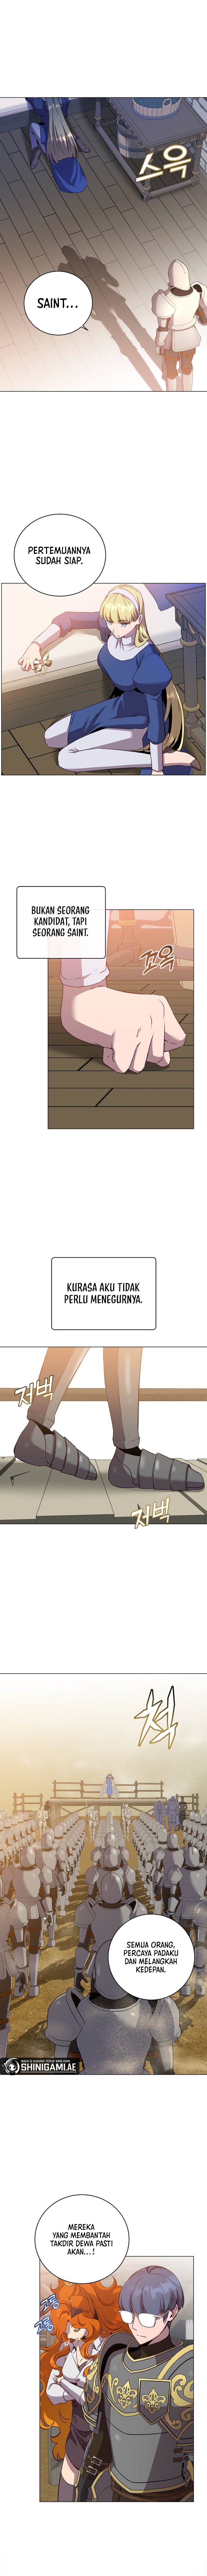 indo-tml Chapter 158